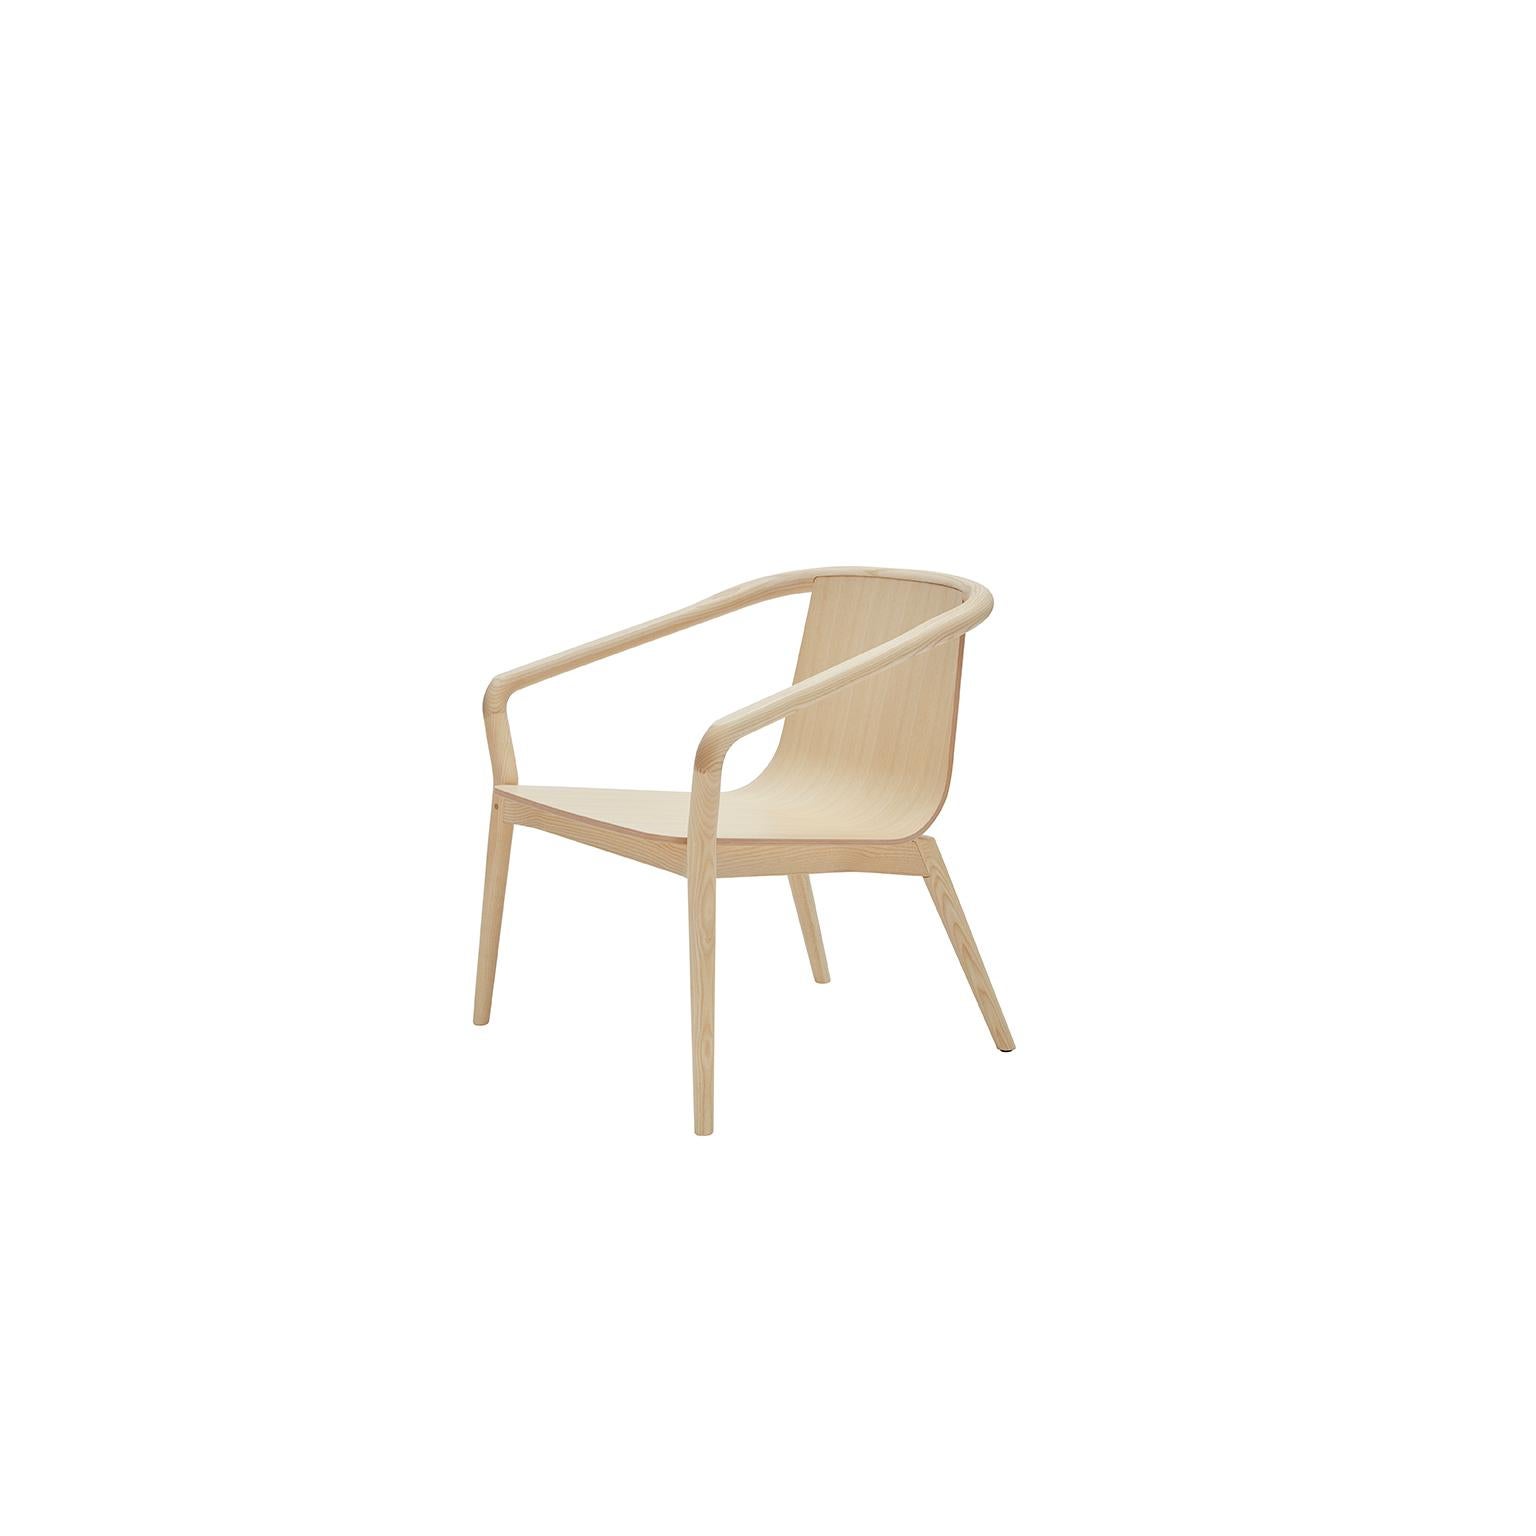 The Thomas armchair is derived from the same design elements as its namesake dining chair, featuring a formed plywood shell suspended in a solid ash frame with the distinctive carved armrest detail. The proportions are modest, ensuring suitability